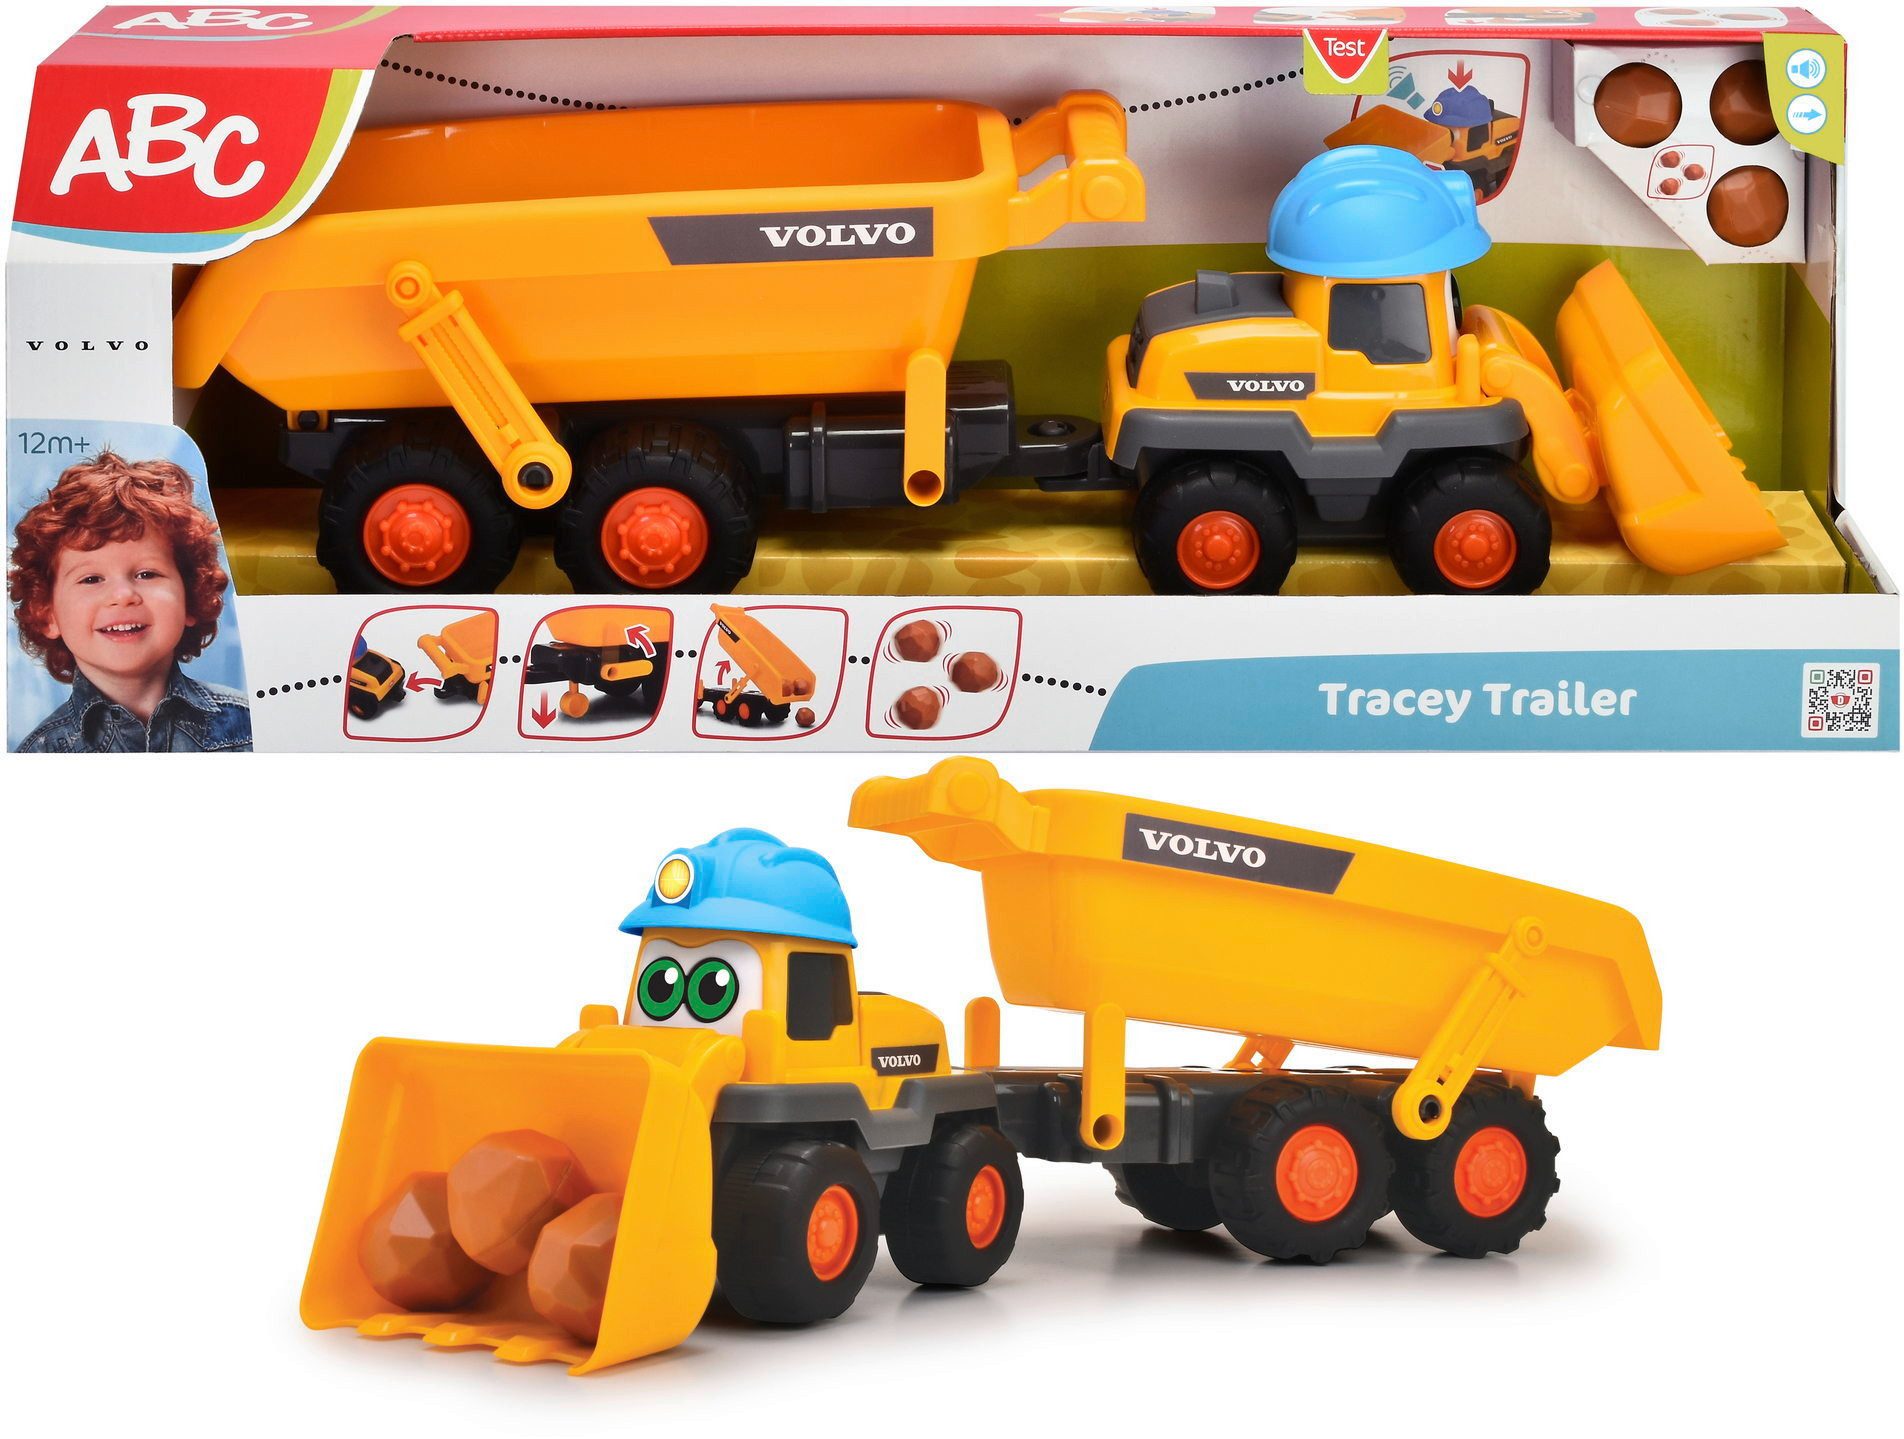 ABC-Dickie-Simba Spielzeug-Bagger ABC Baby- & Kleinkindspielzeug Bagger mit Anhänger Tracey Trailer 65cm